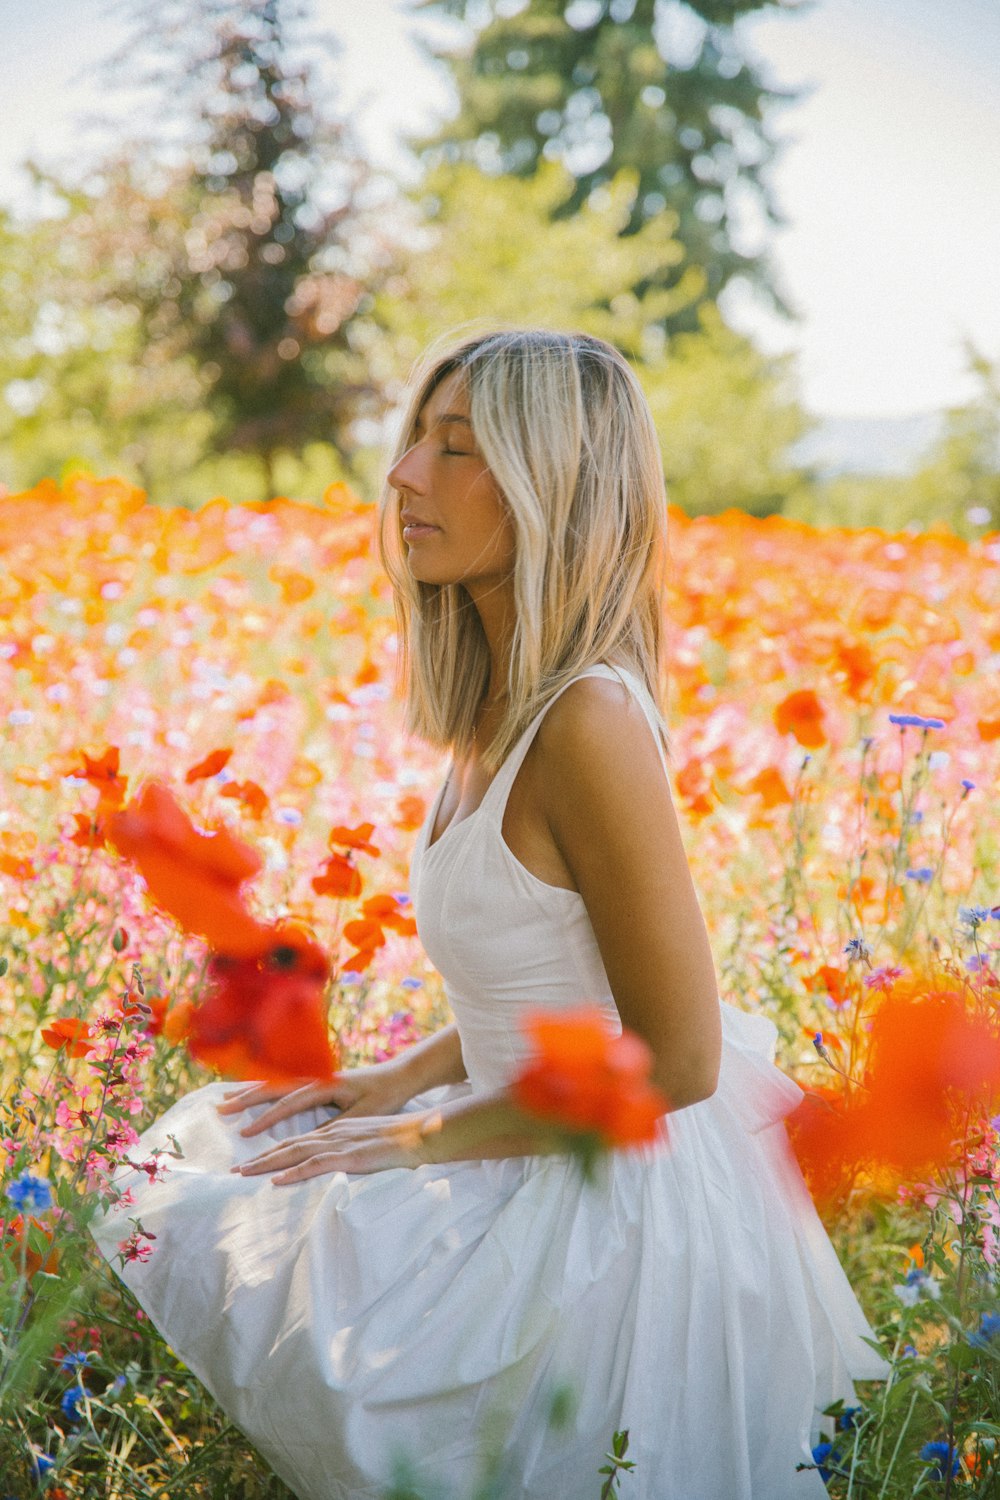 a woman in a white dress sitting in a field of flowers